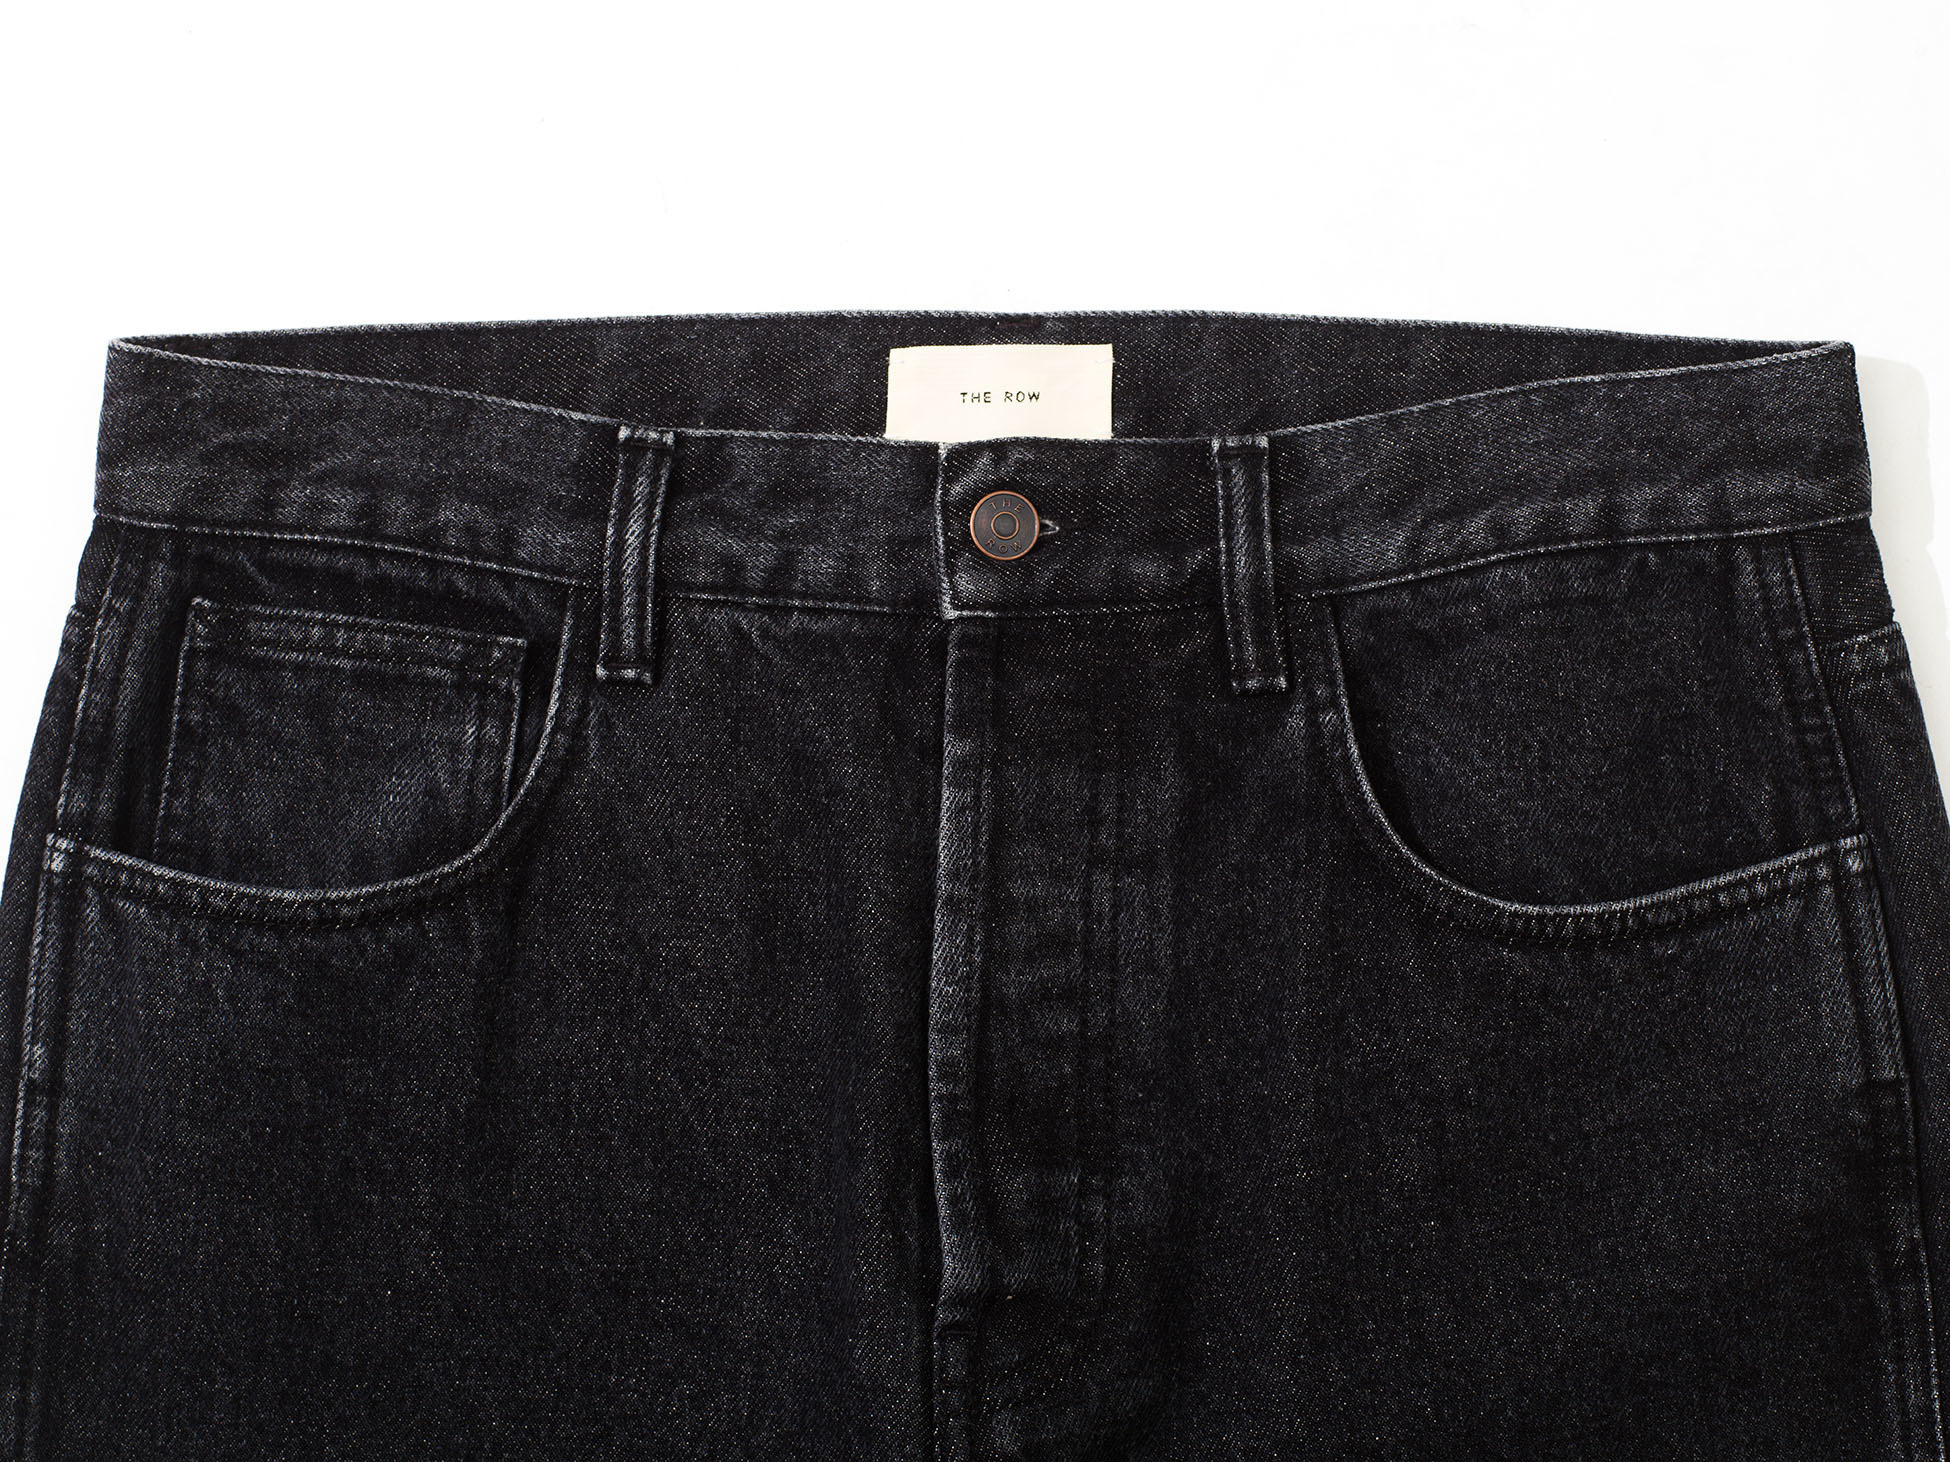 THE ROW Exclusive for Ron Herman CORTLAND JEANS 8.26(Sat) New Arrival